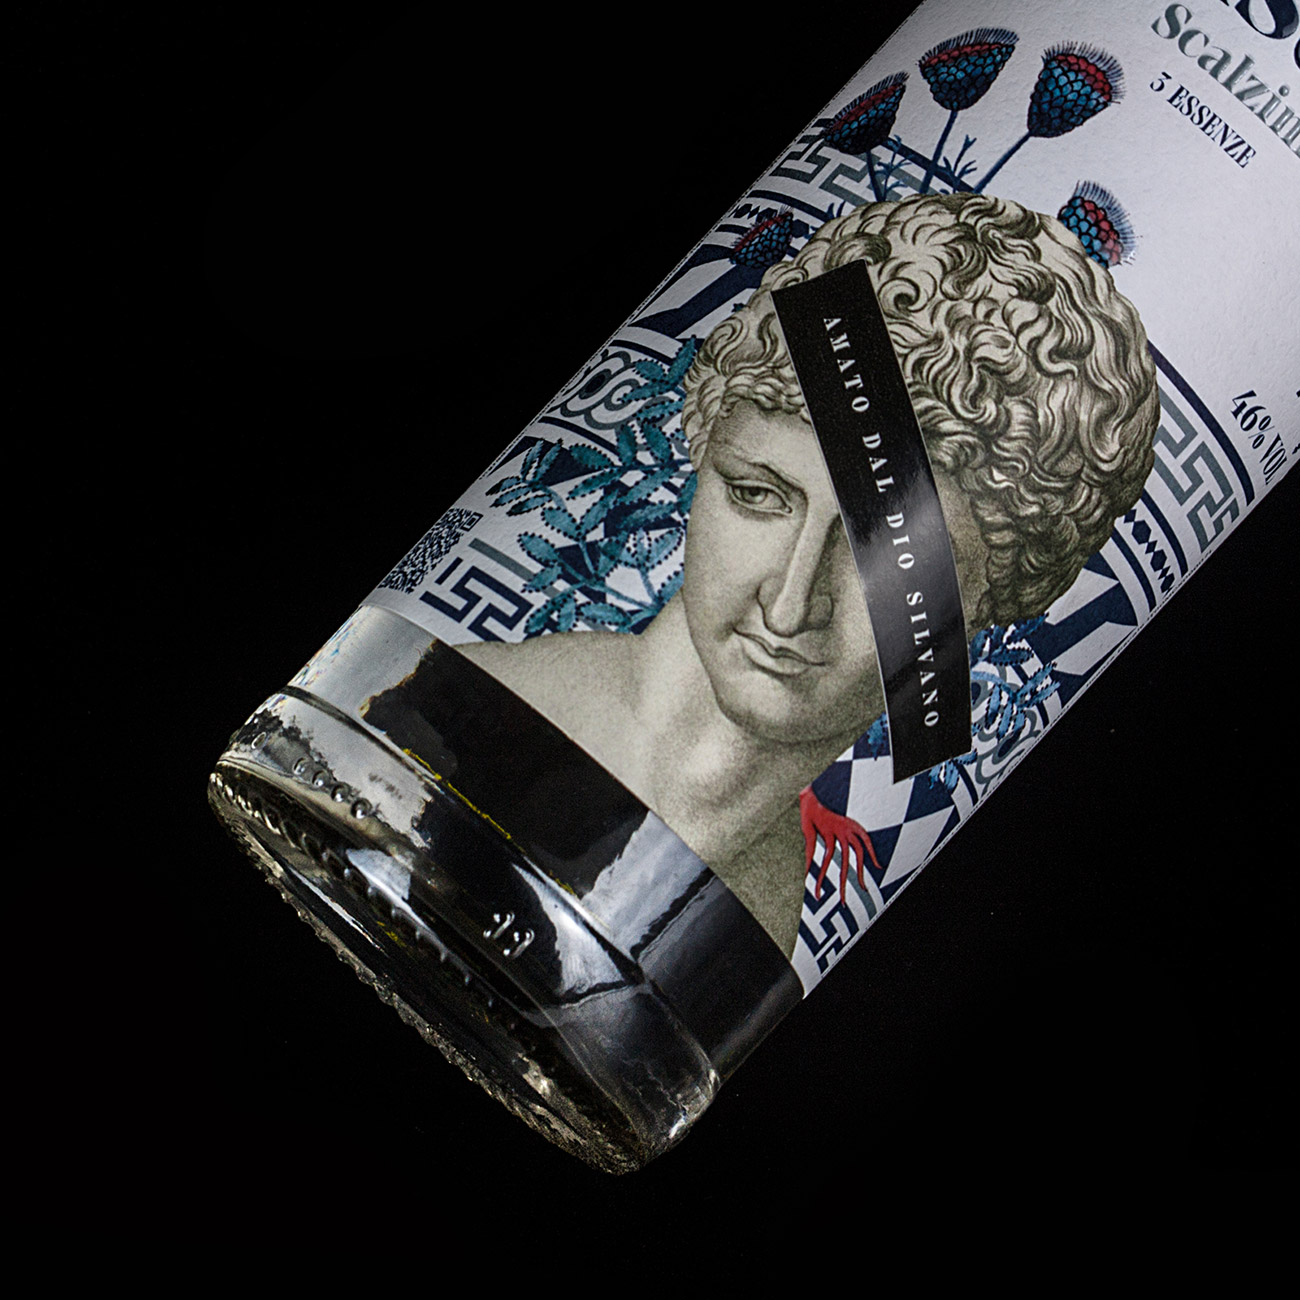 Mystique of Mistrà – A Creative Label Design by Silvano Scalzini Pays Homage to the God Silvanus and Italian Heritage